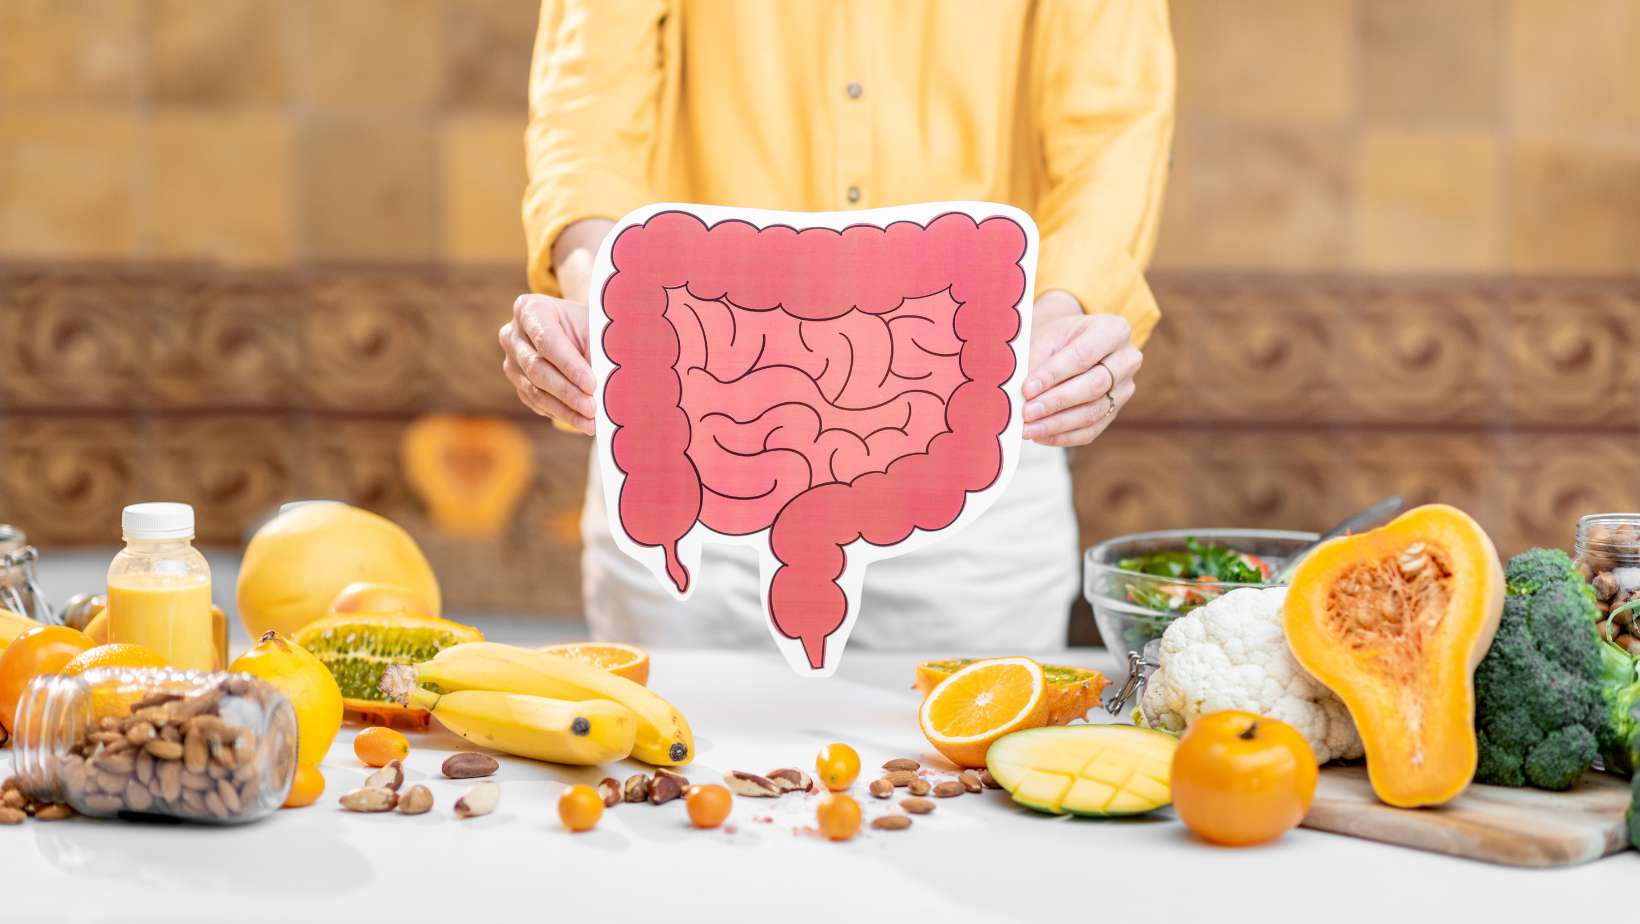 Bowel Model and Variety of Healthy Fresh Food